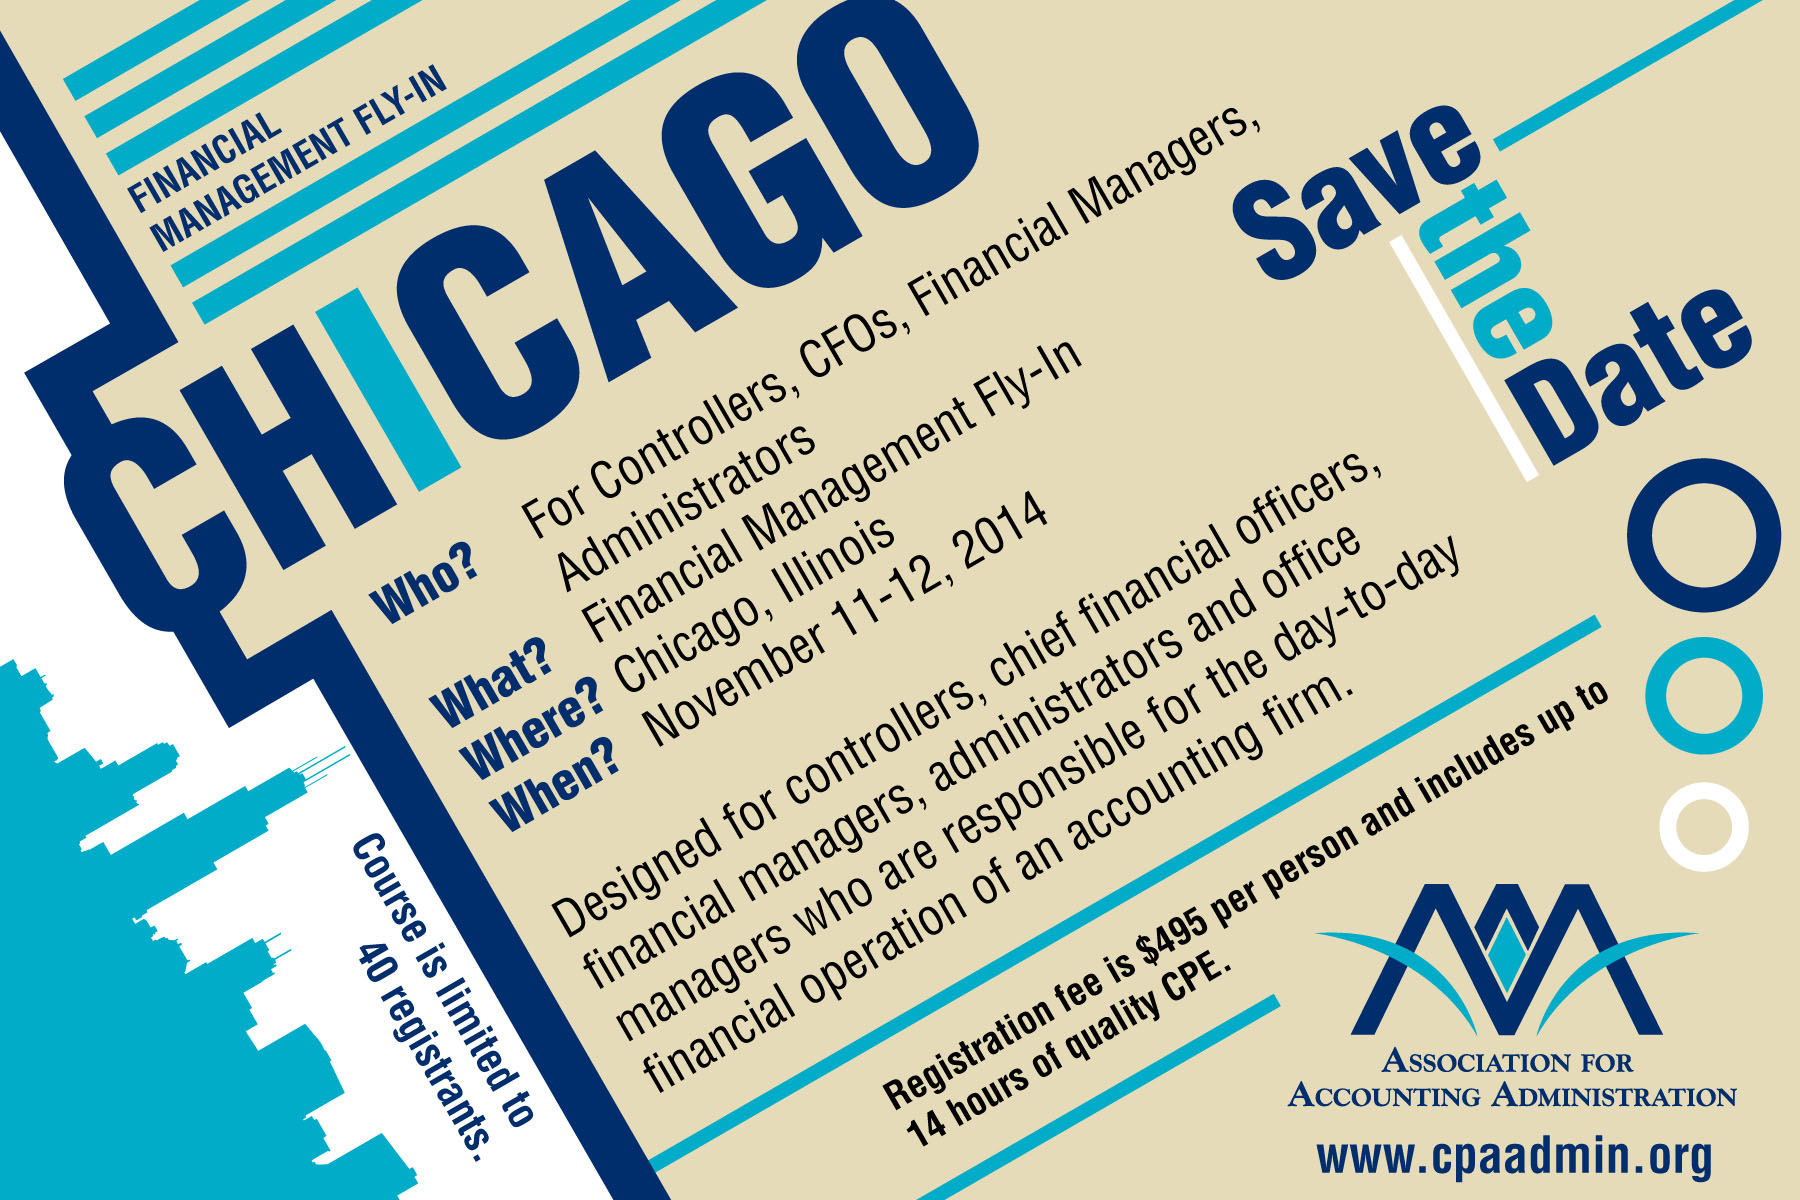 AAA Financial Management Fly-In Features Bill Reeb and More!